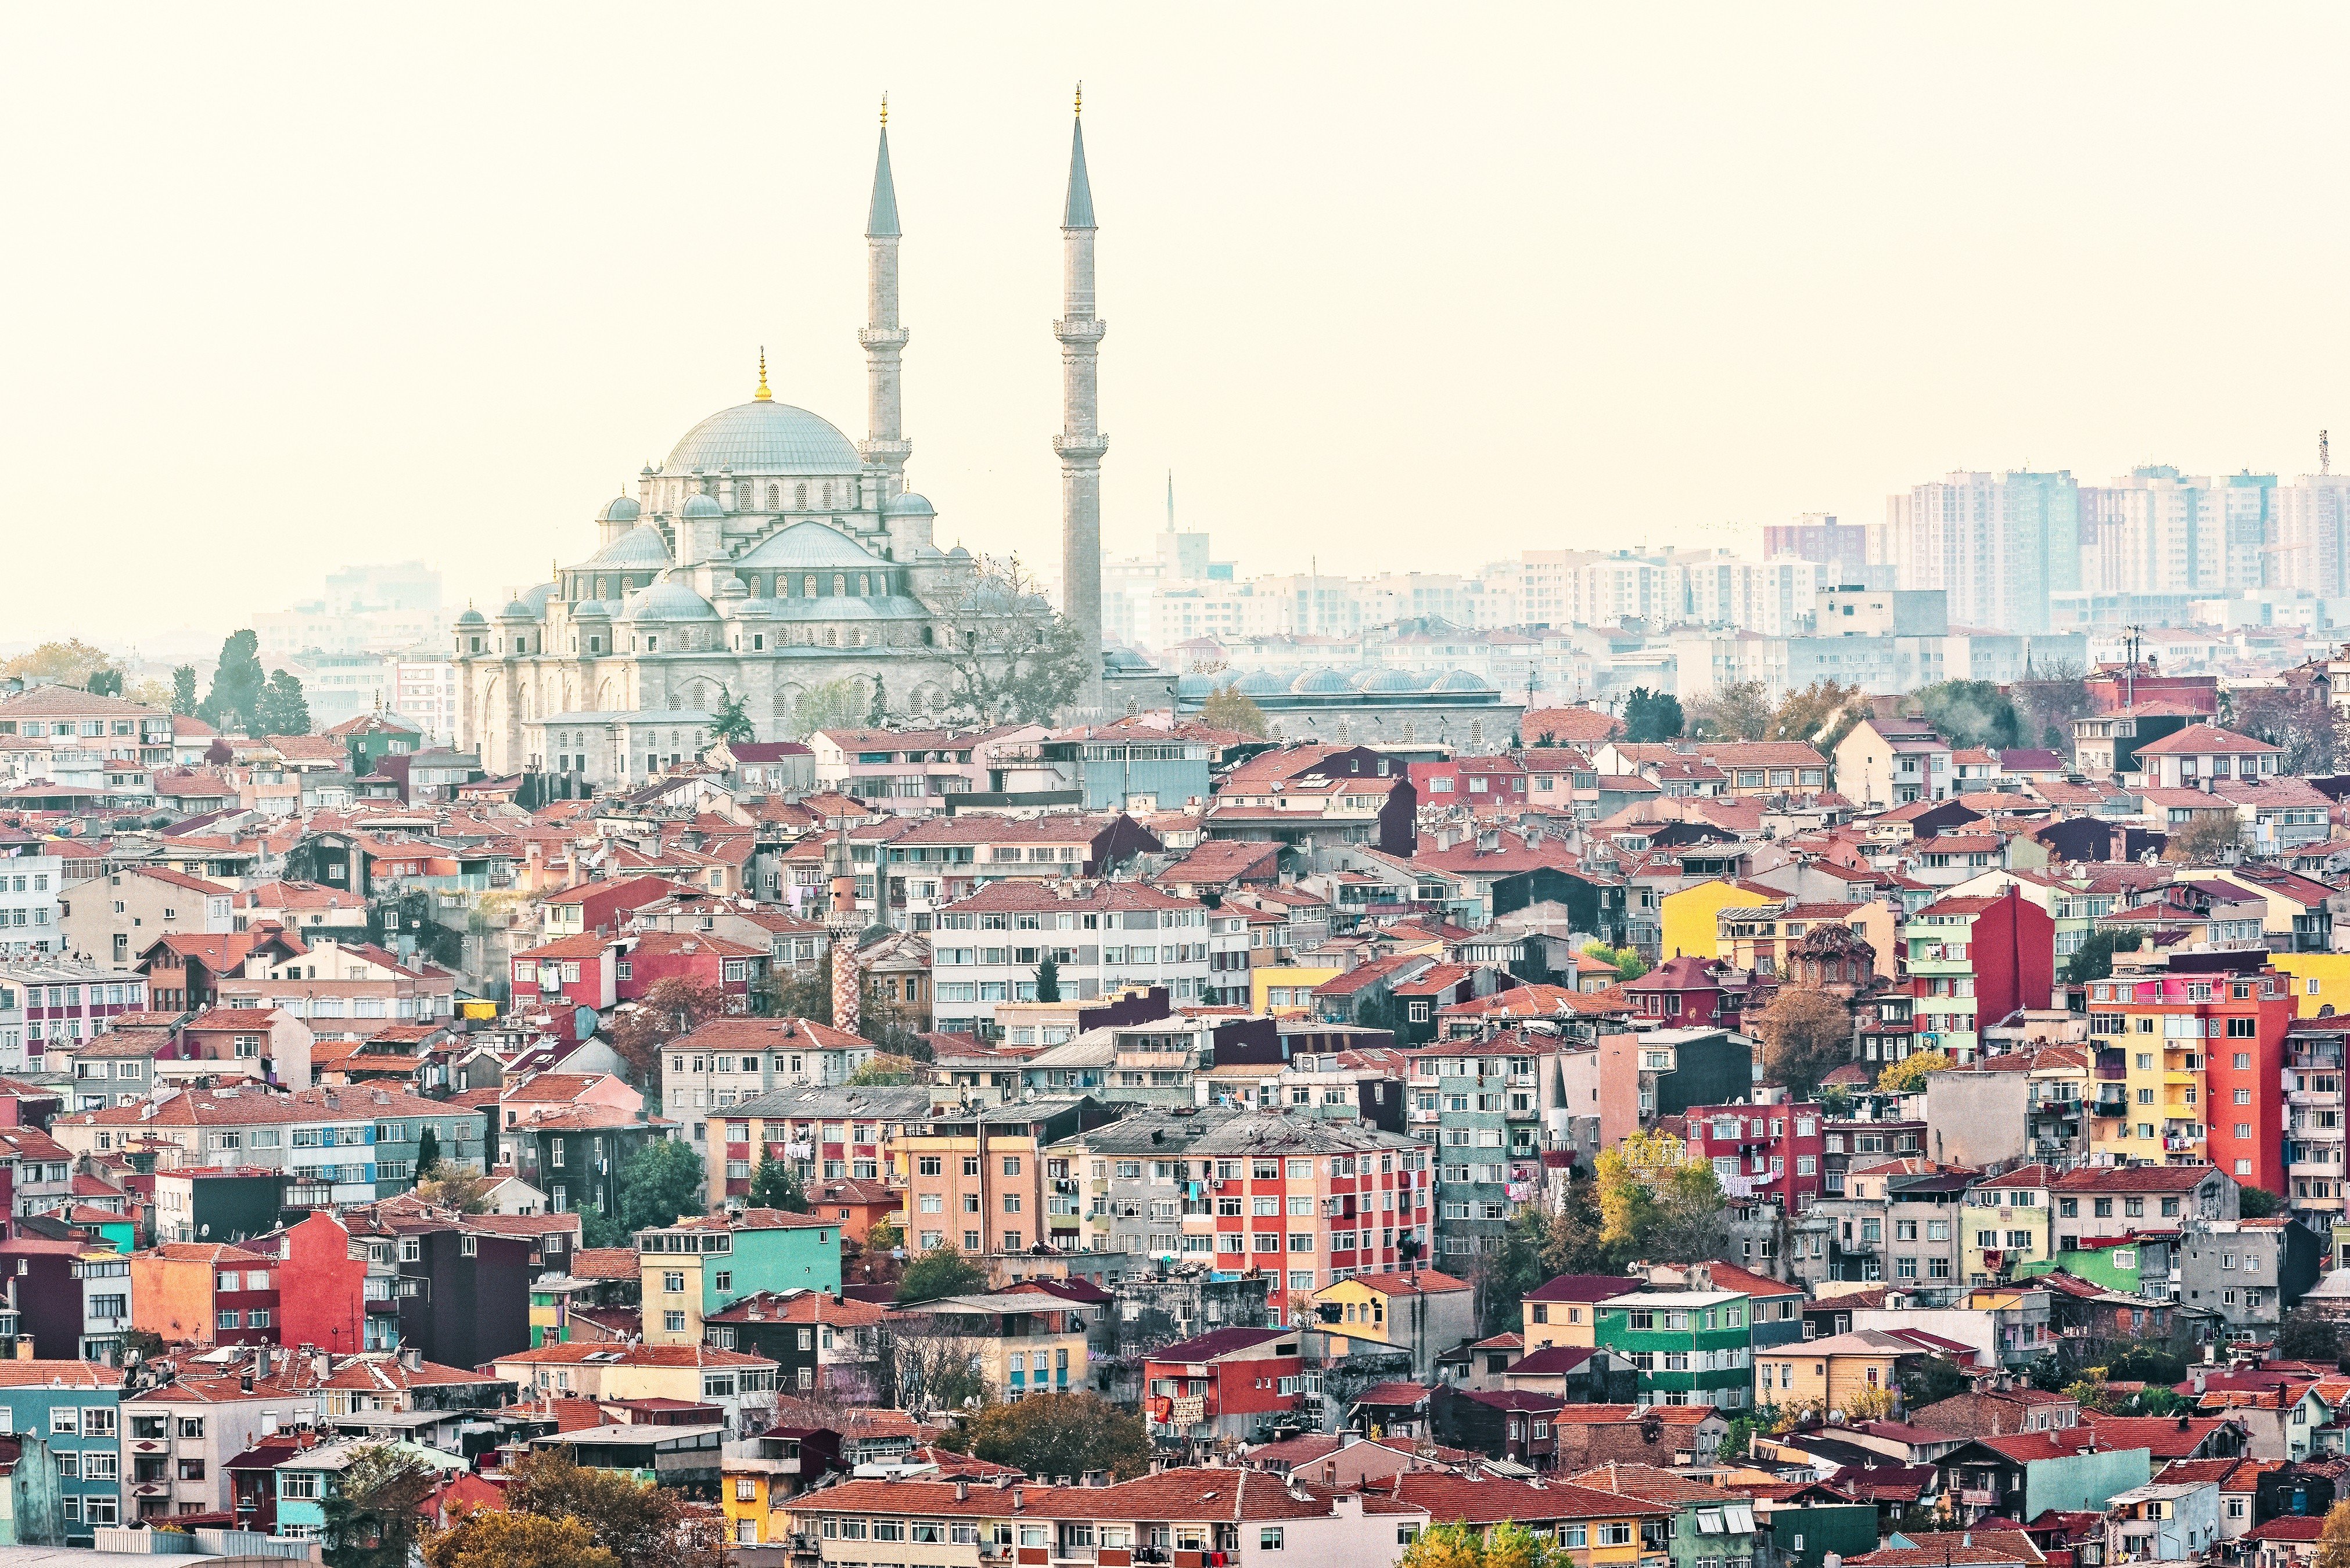 A view of Istanbul’s dense residential area with the Fatih Mosque in the background. Turkey grants overseas buyers citizenship if they buy property worth US$250,000. Photo: Shutterstock Images